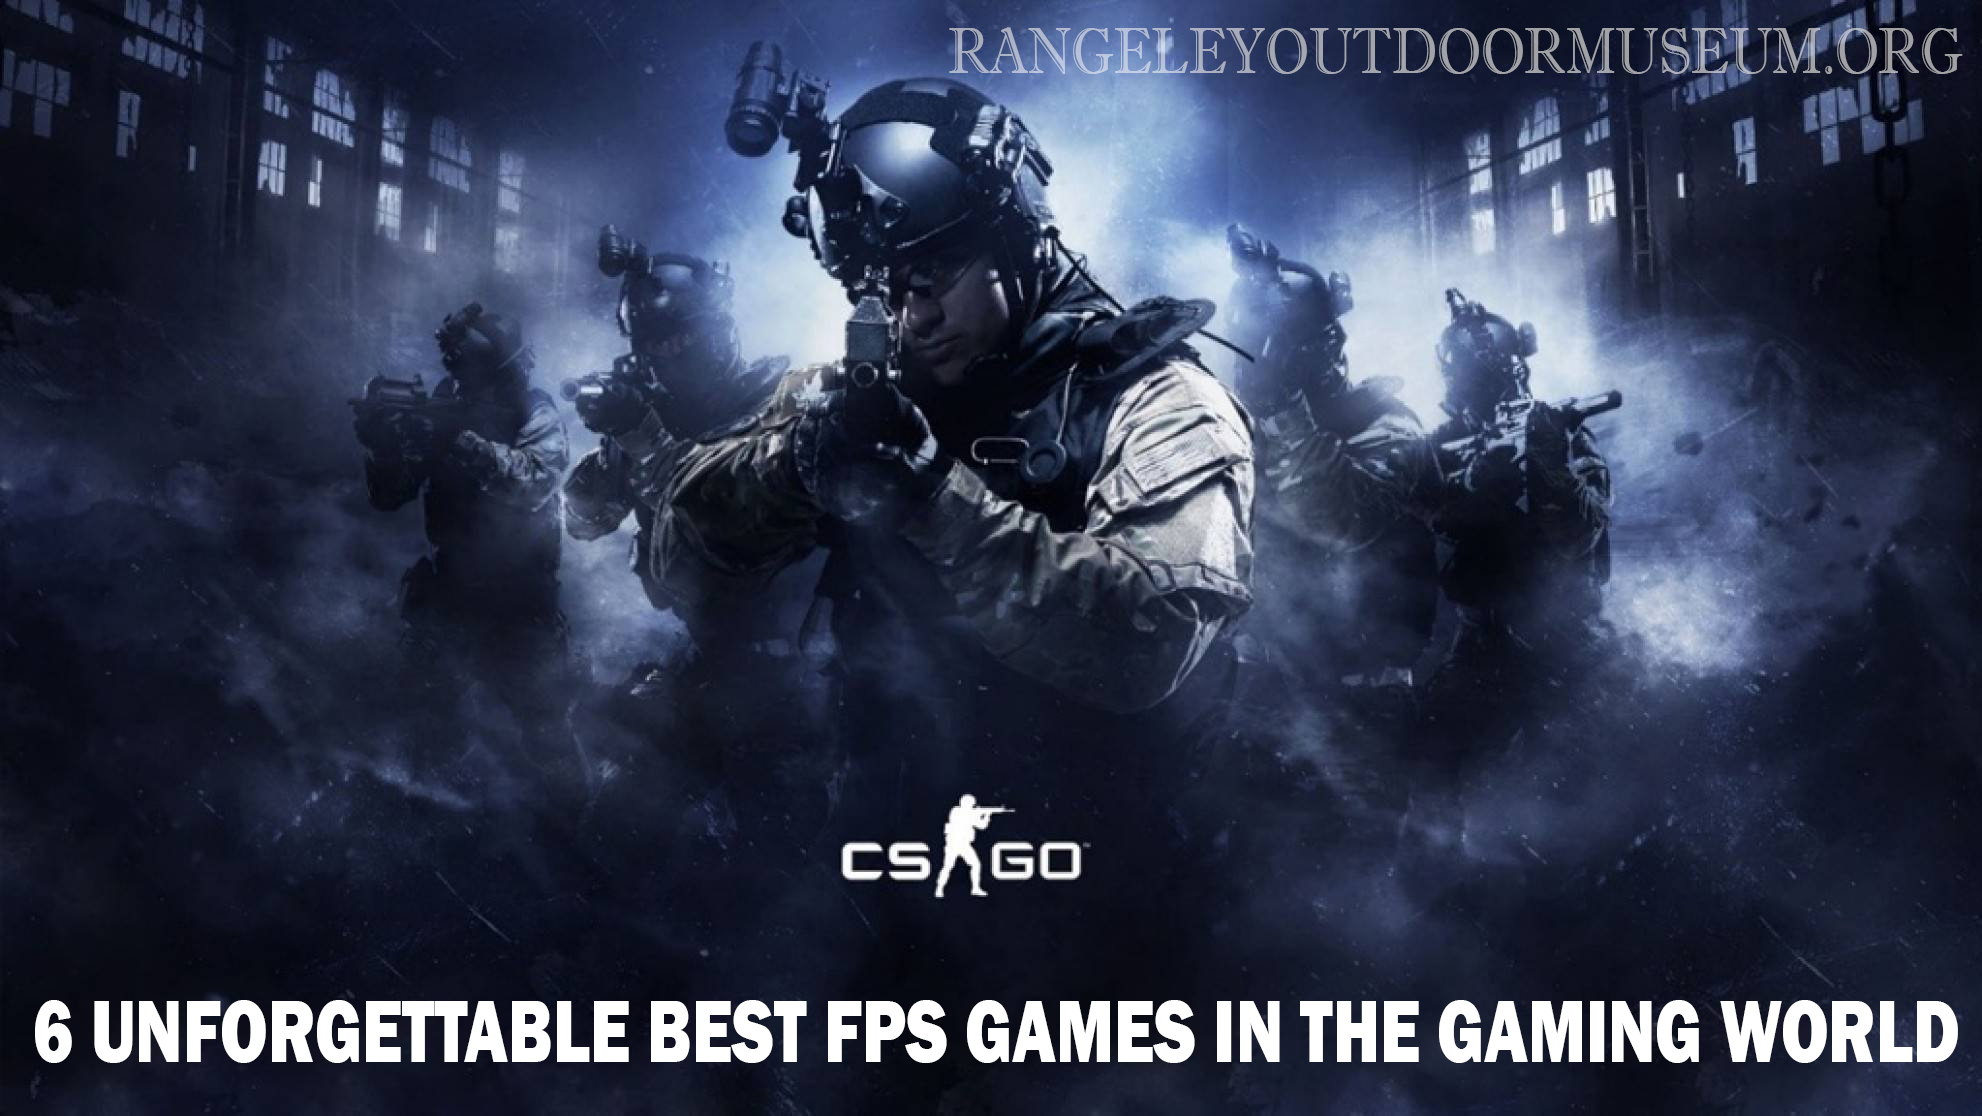 6 Unforgettable Best FPS Games in the Gaming World